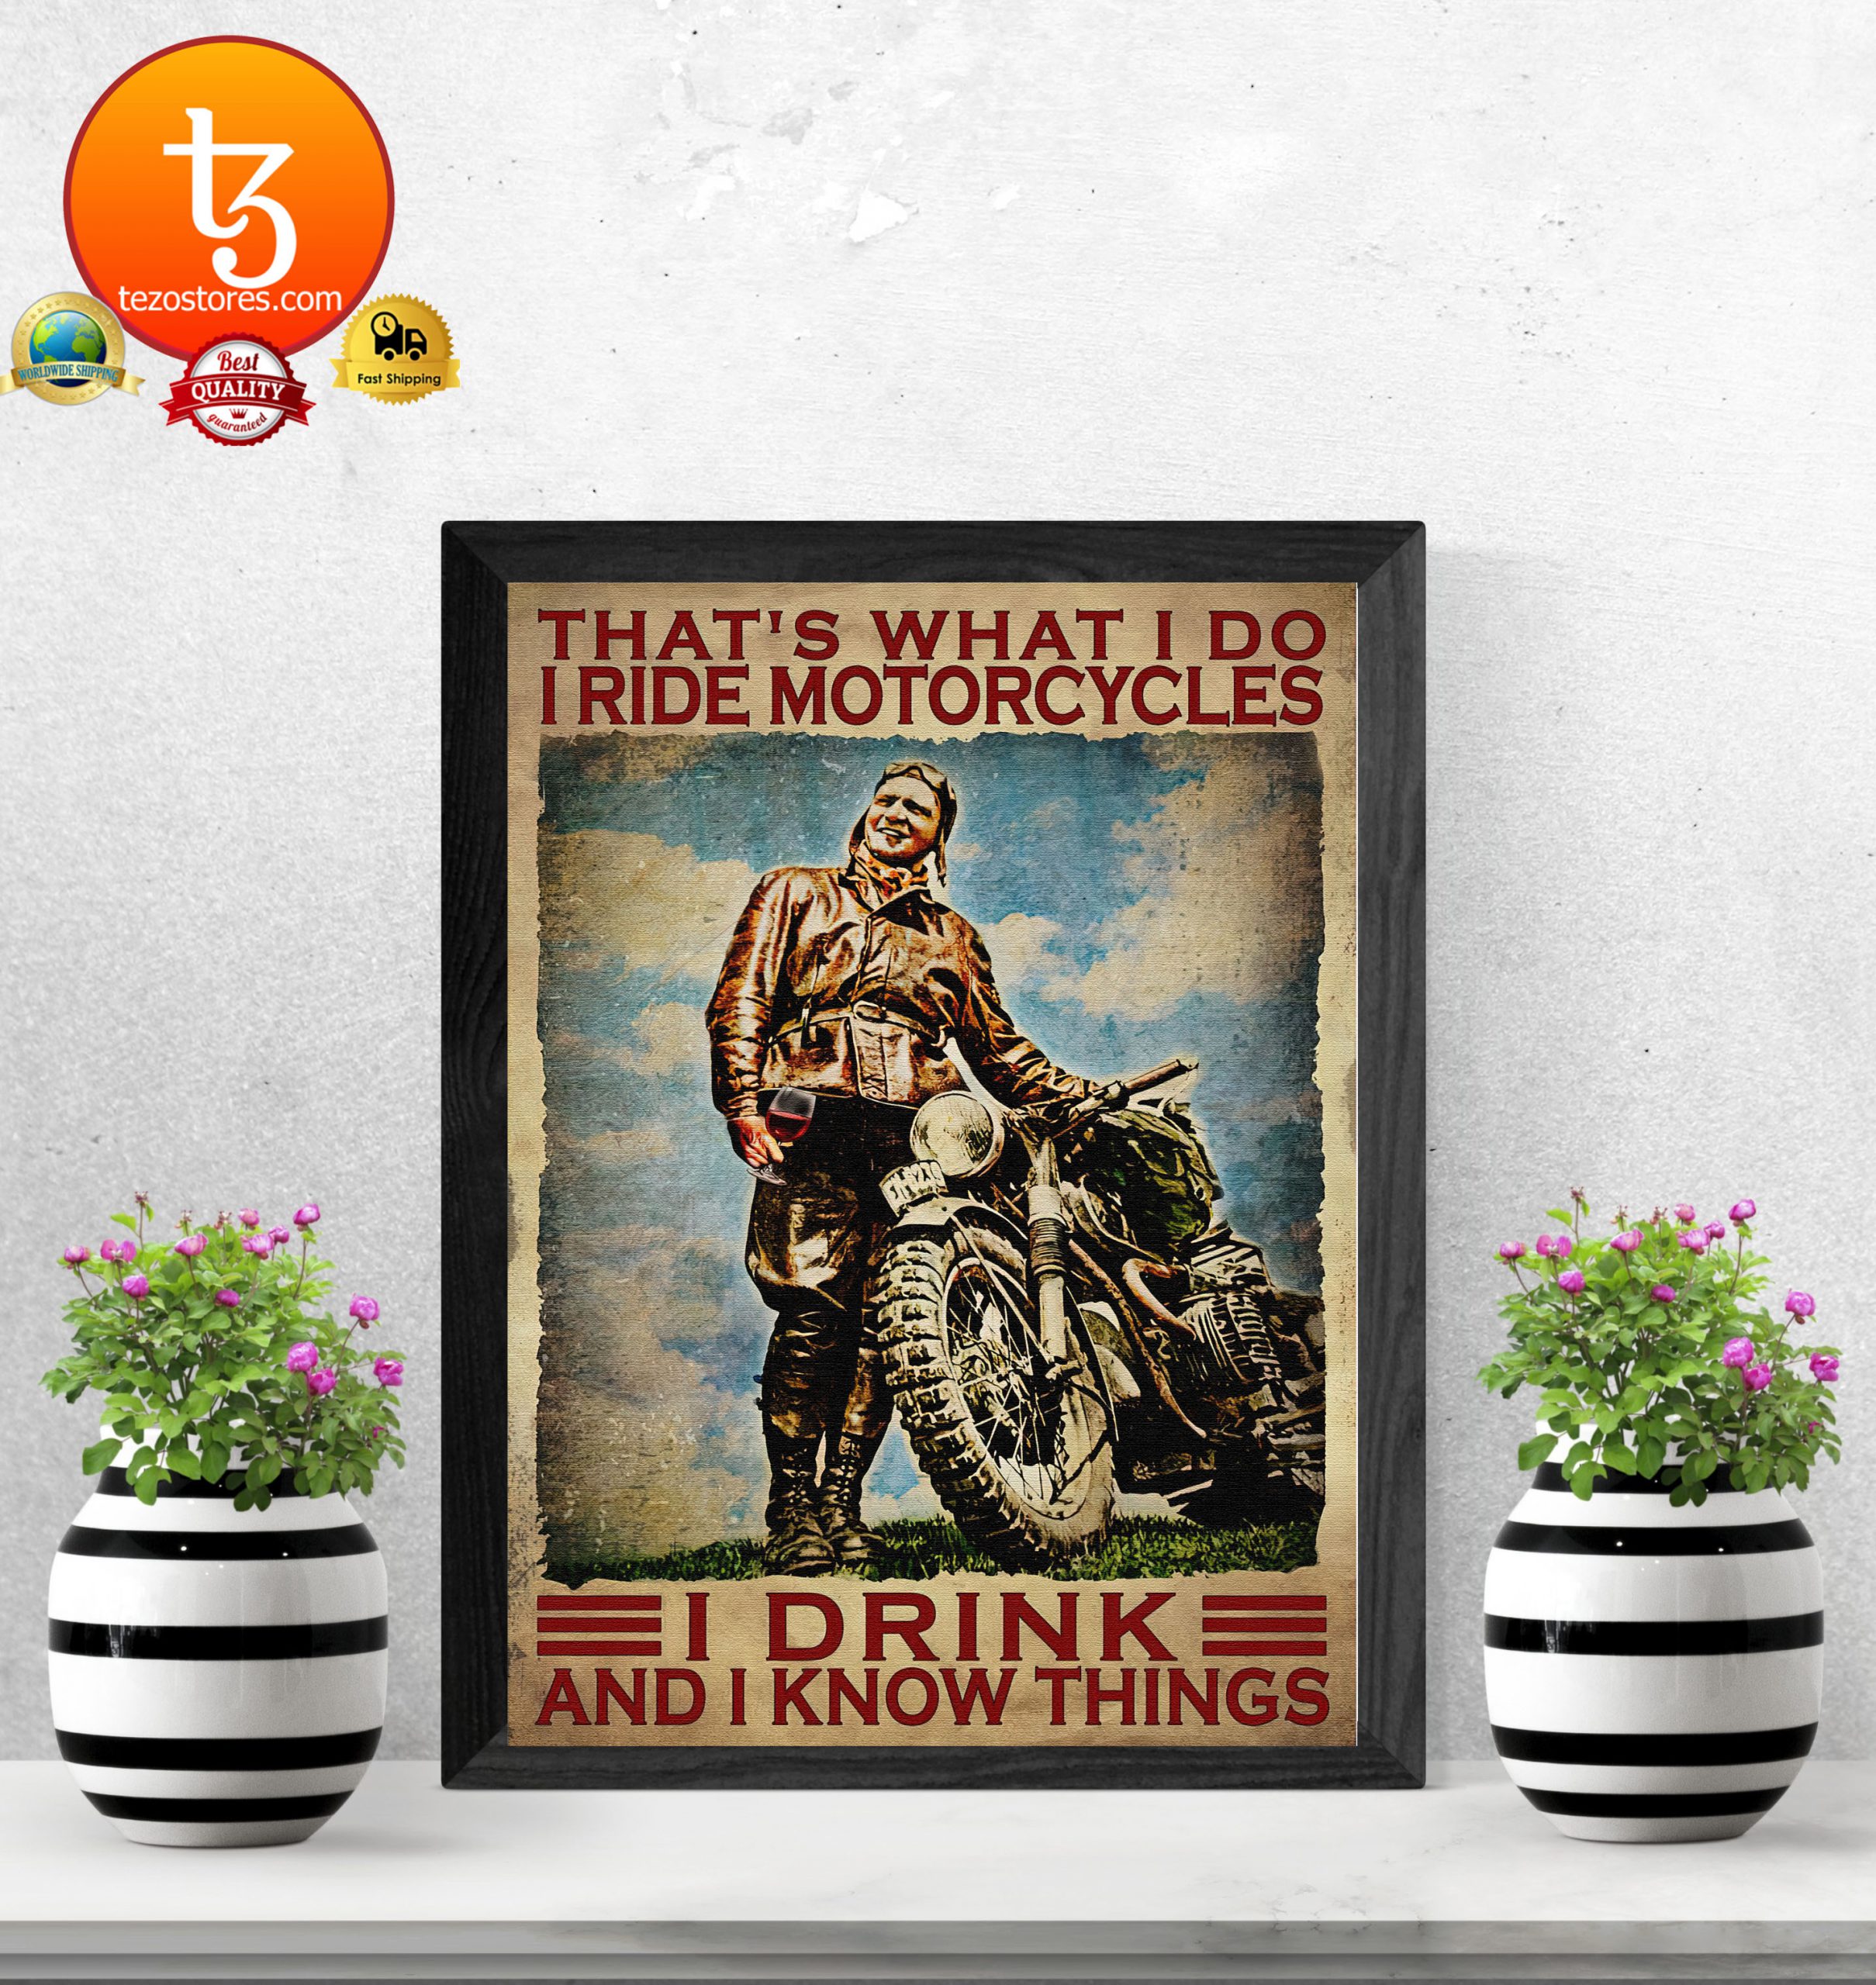 Thats what I do I ride motorcycles I drink and I know things poster3